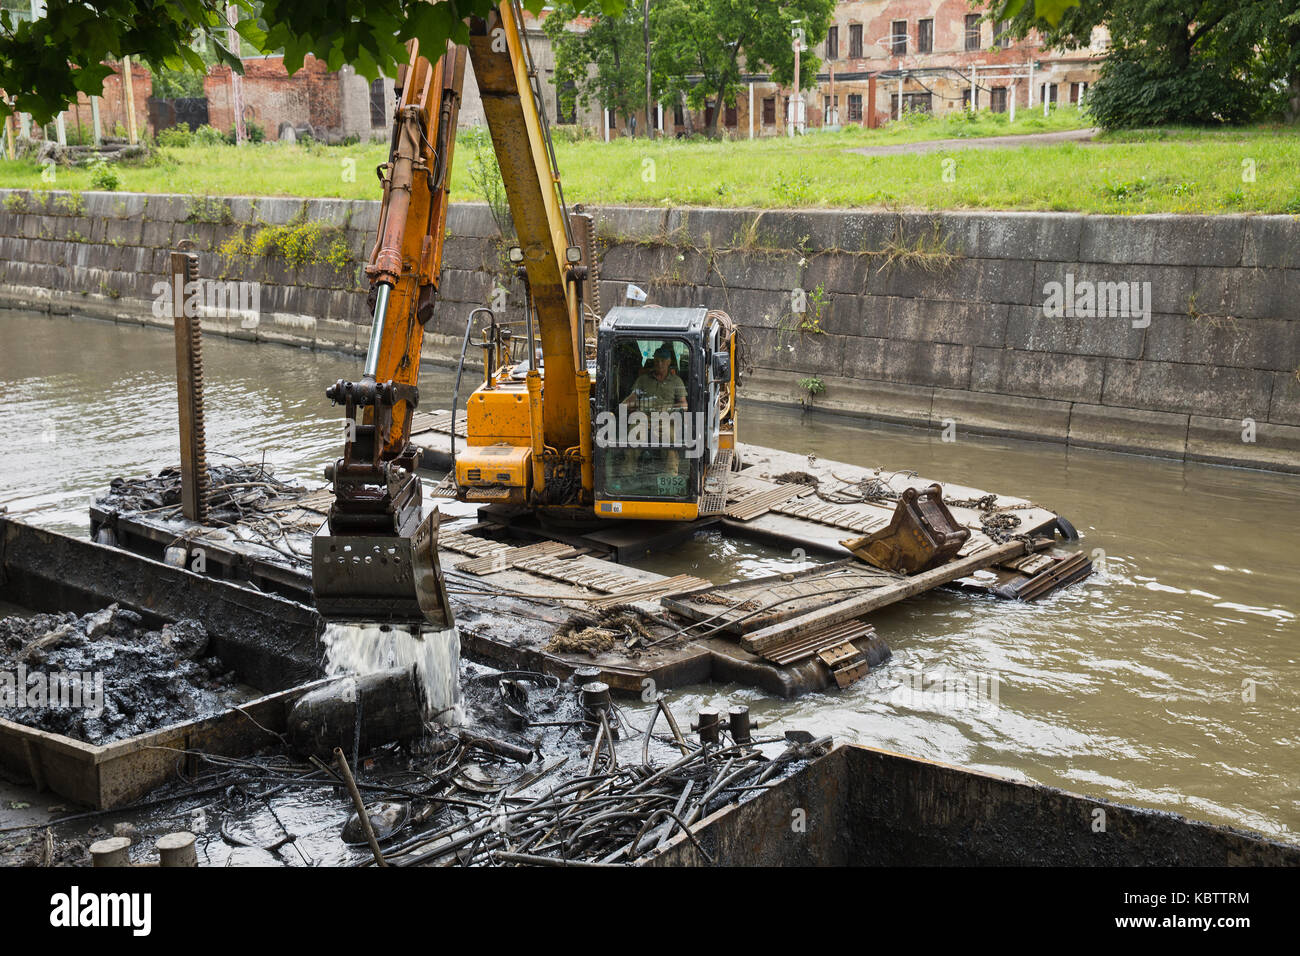 ST. PETERSBURG, RUSSIA - JULY 26, 2015: Working on the dredger clears the bottom of the canal from the scrap metal and sediment Stock Photo